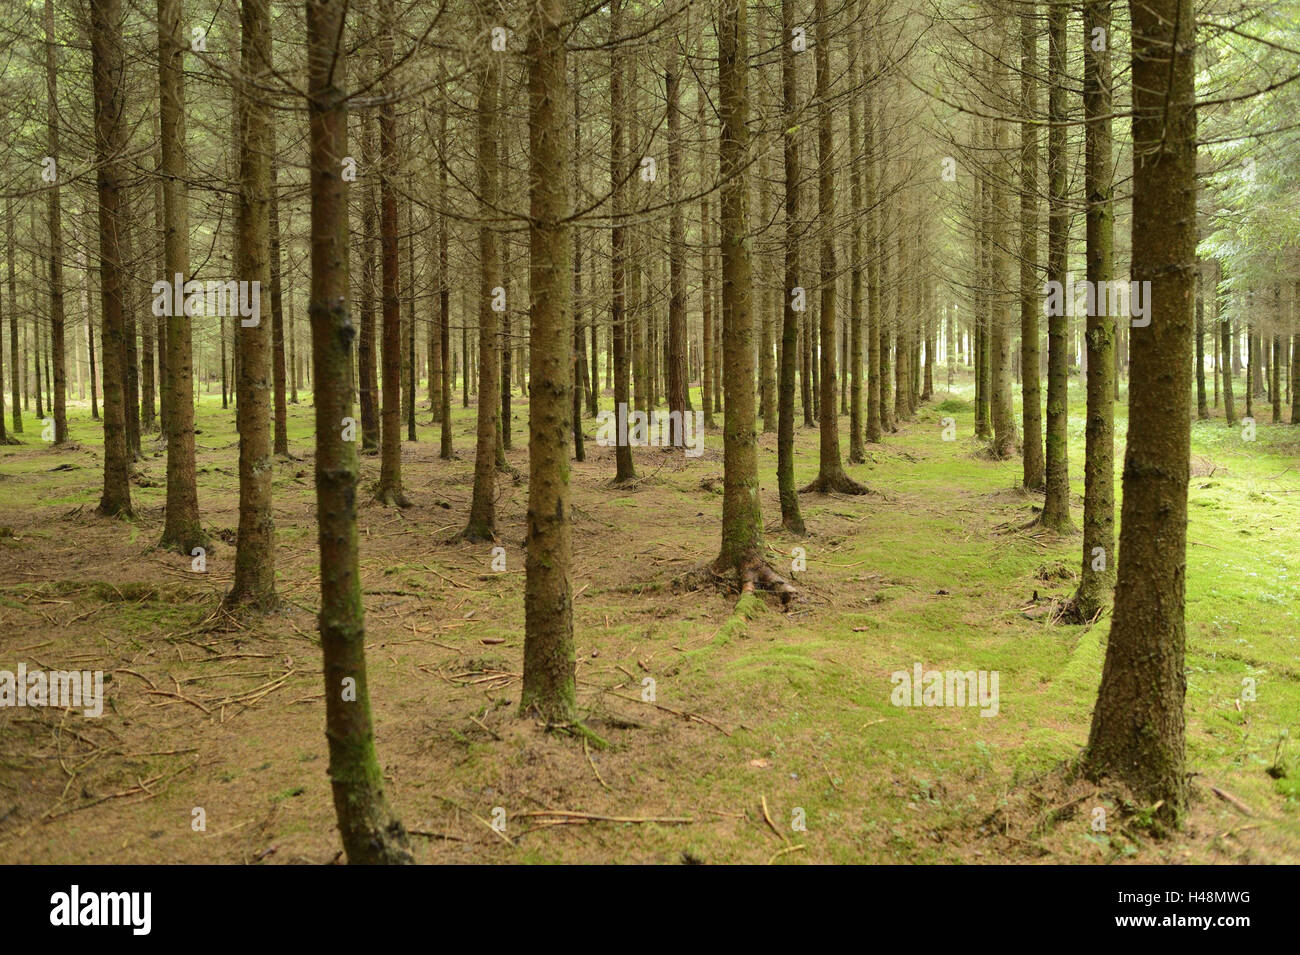 Spruces, Picea abies, spruce forest, monoculture, Stock Photo